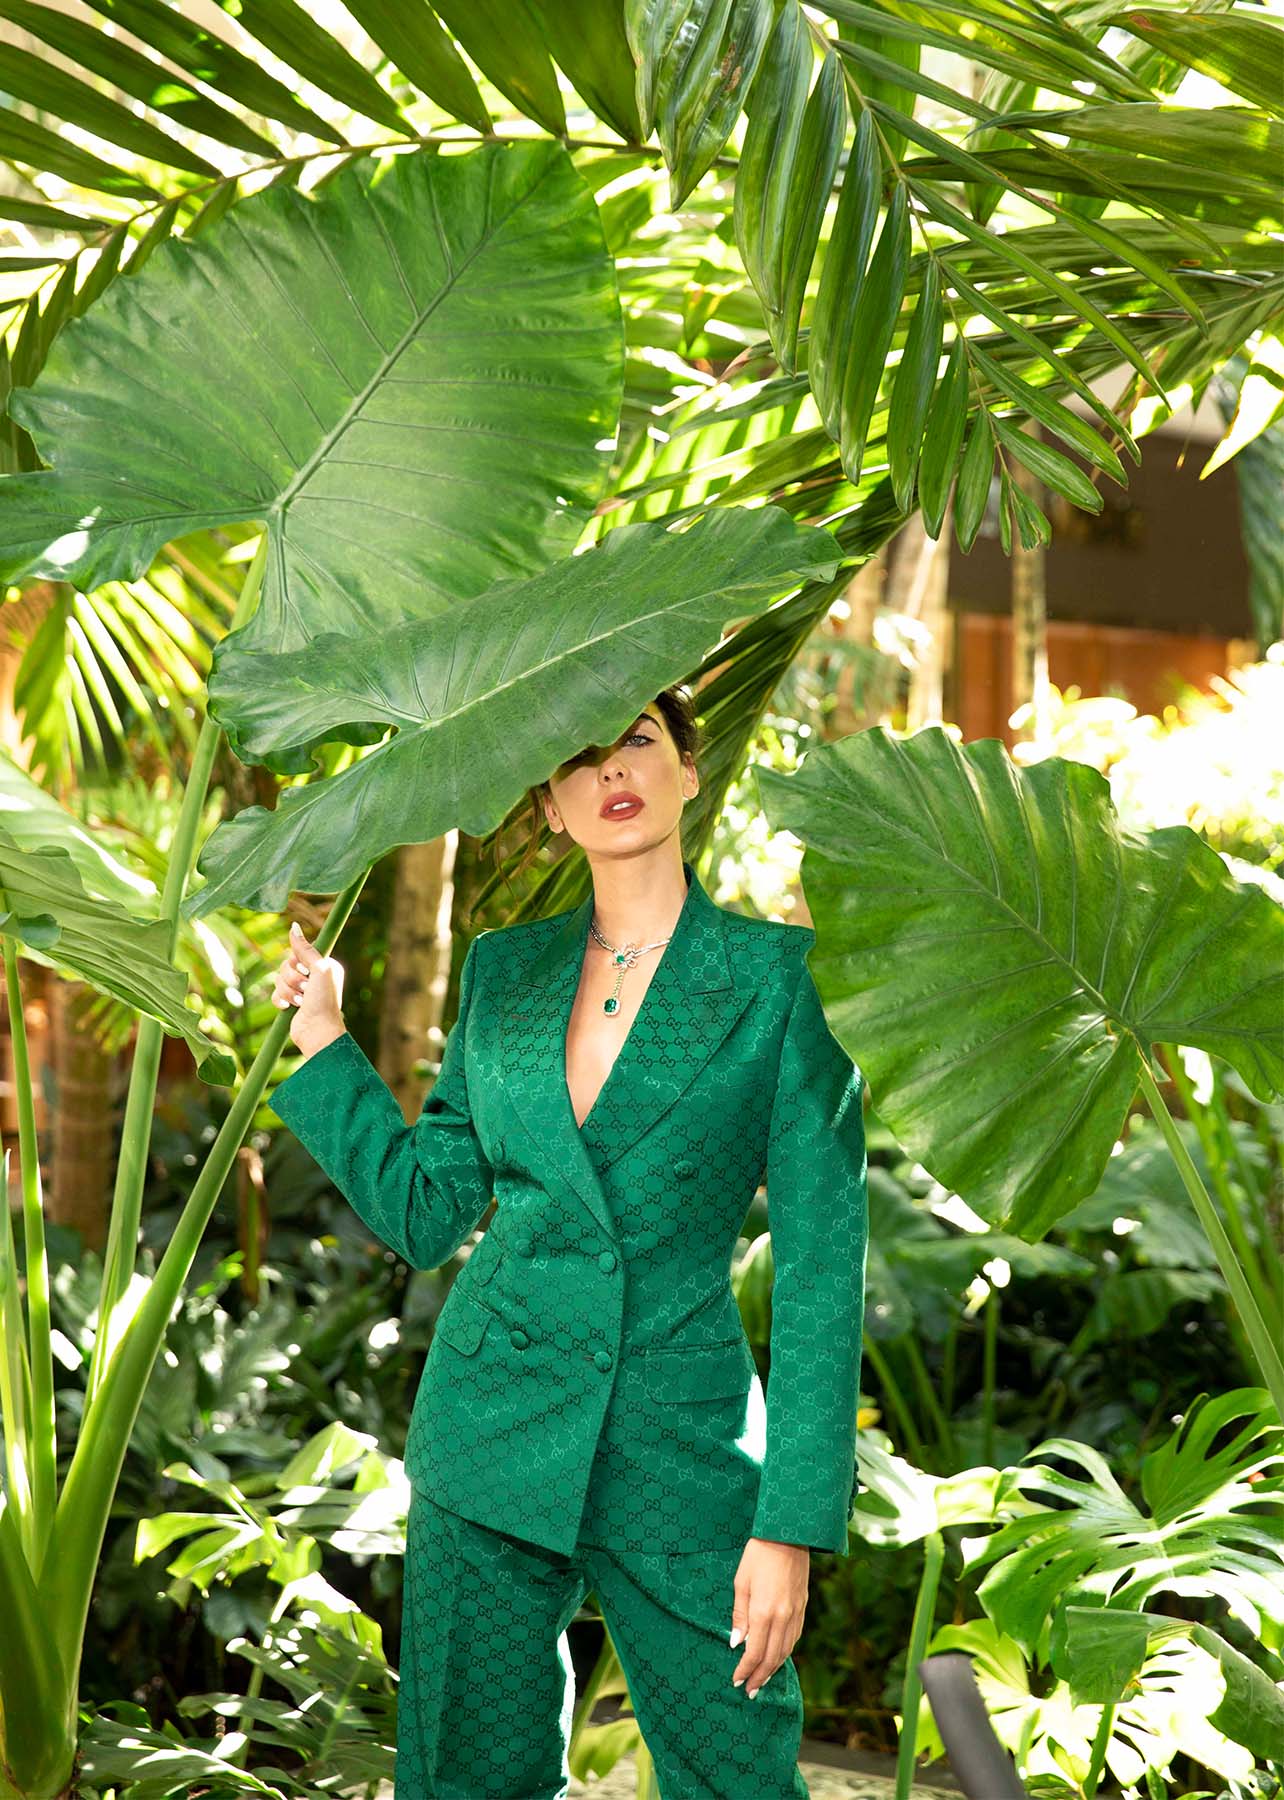 Model stands behind a palm tree in a full Gucci emerald suit